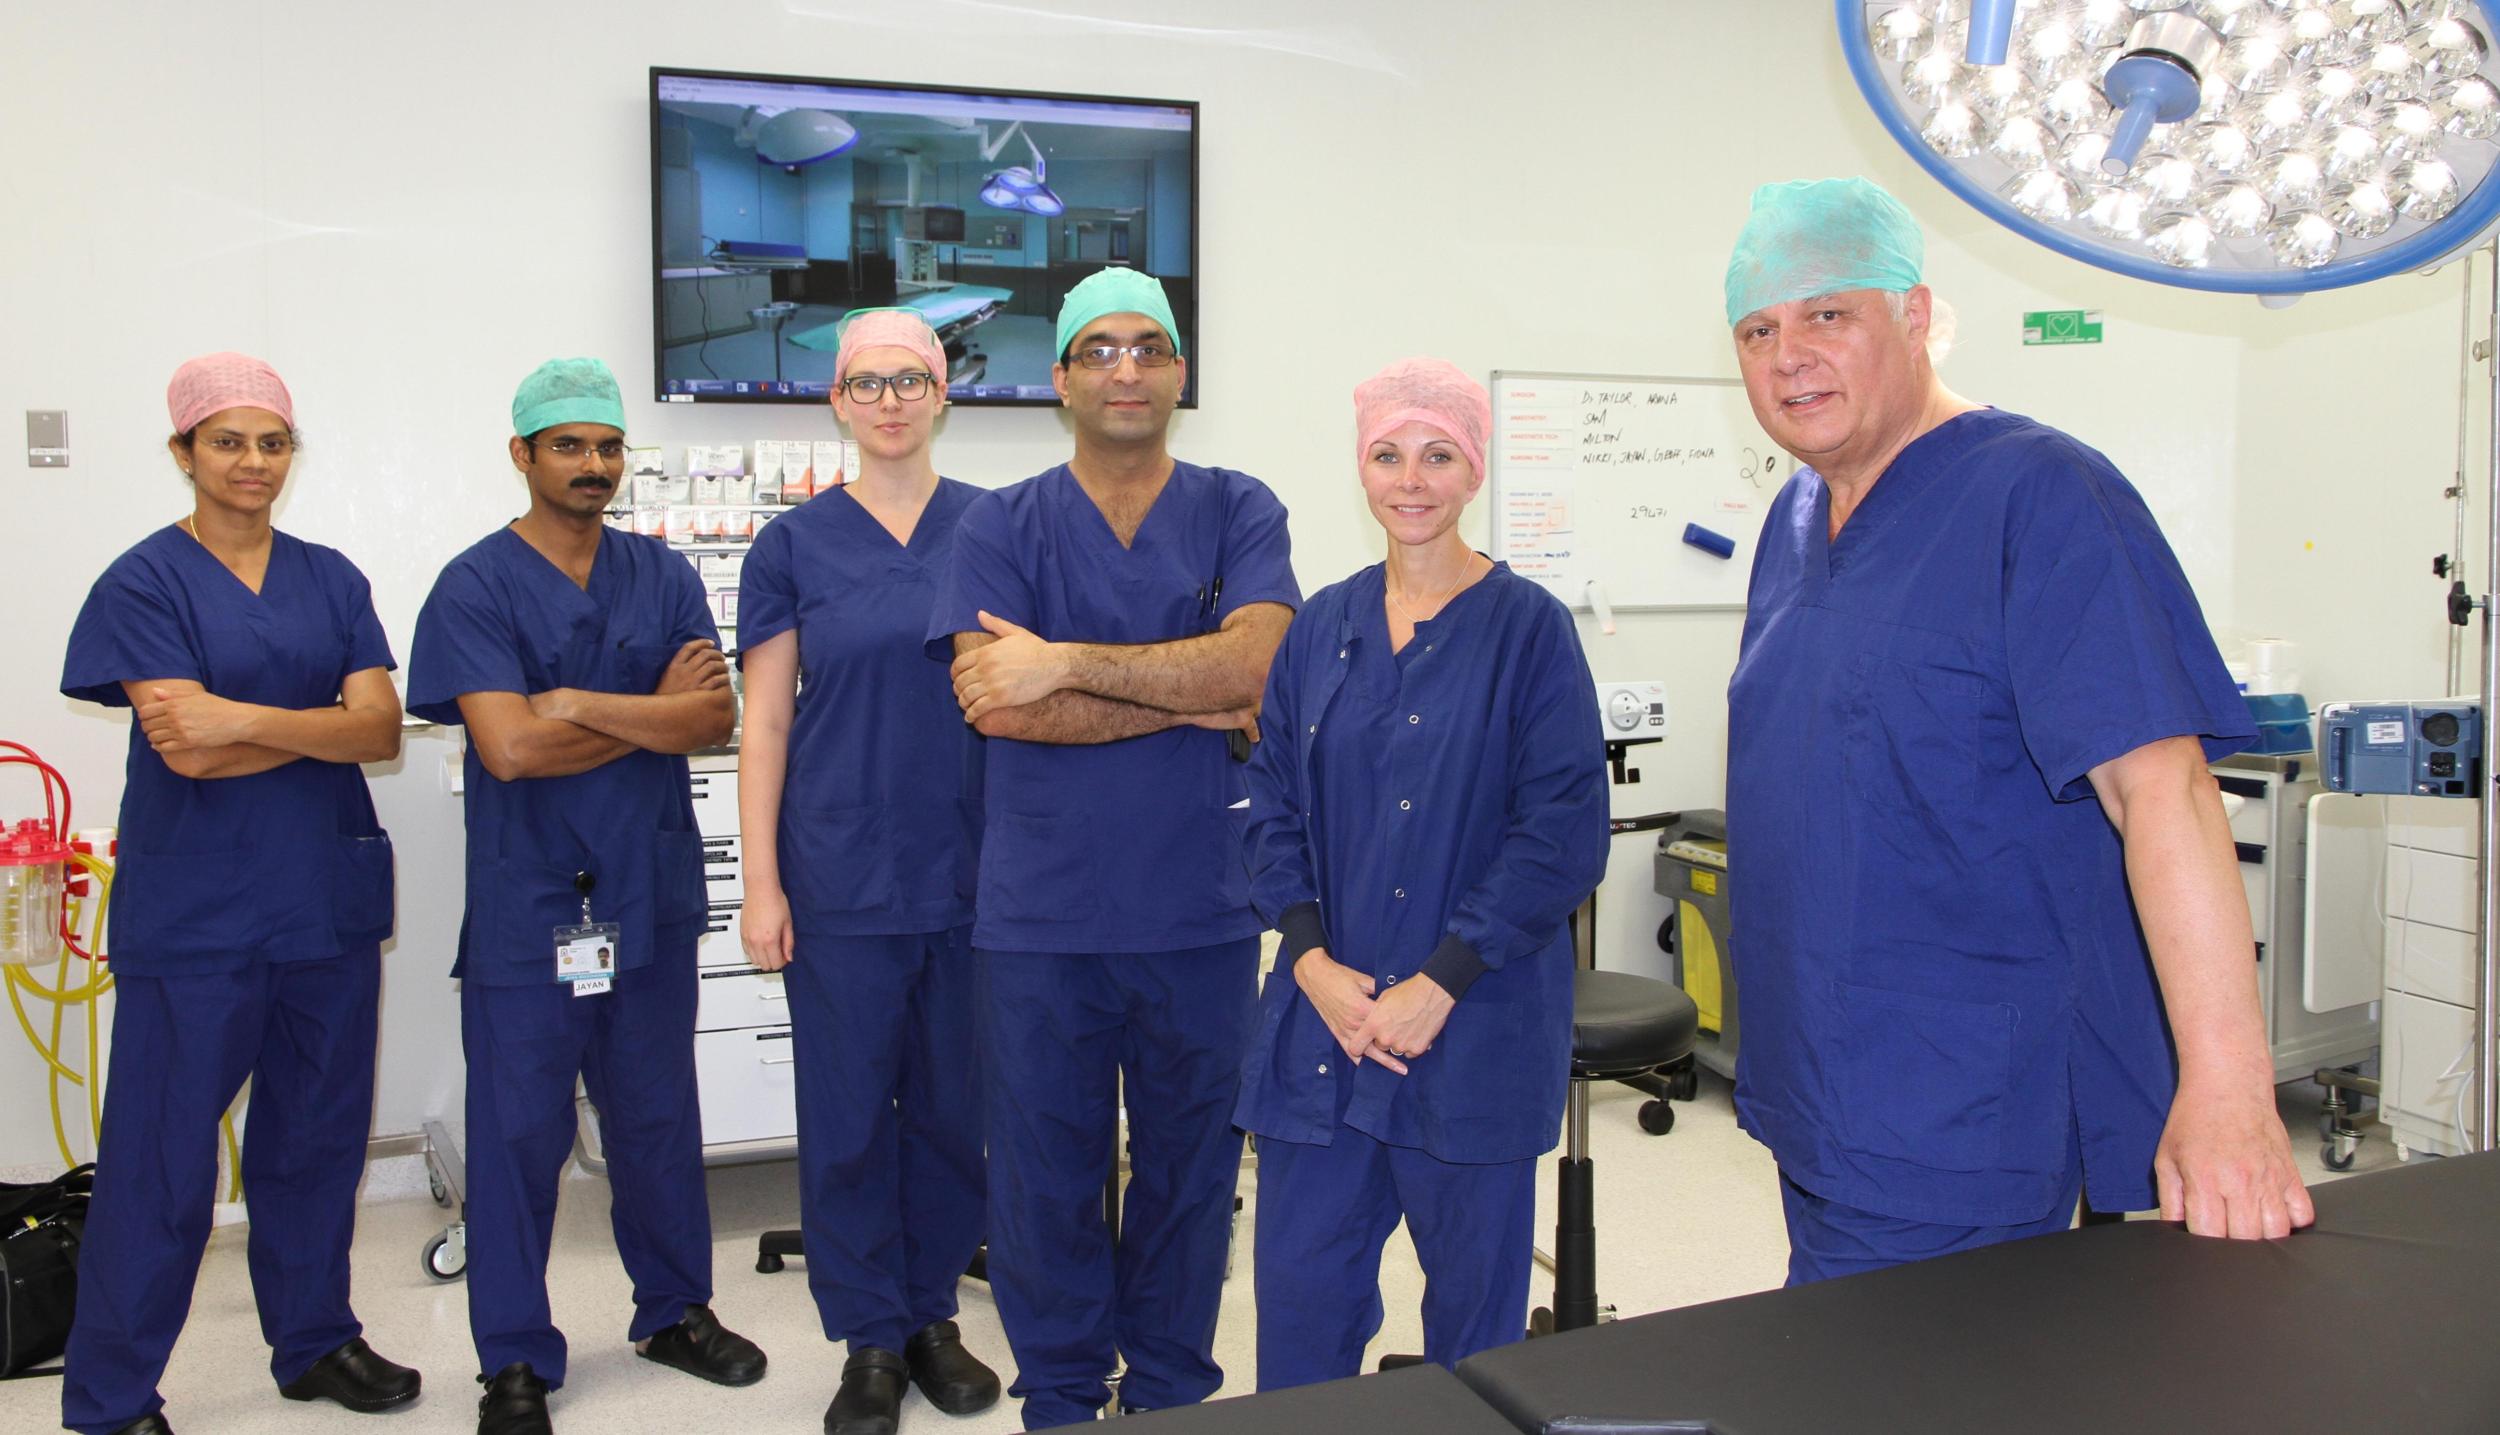 Dr Stewart Flemming and the theatre team hold pre-operative briefings